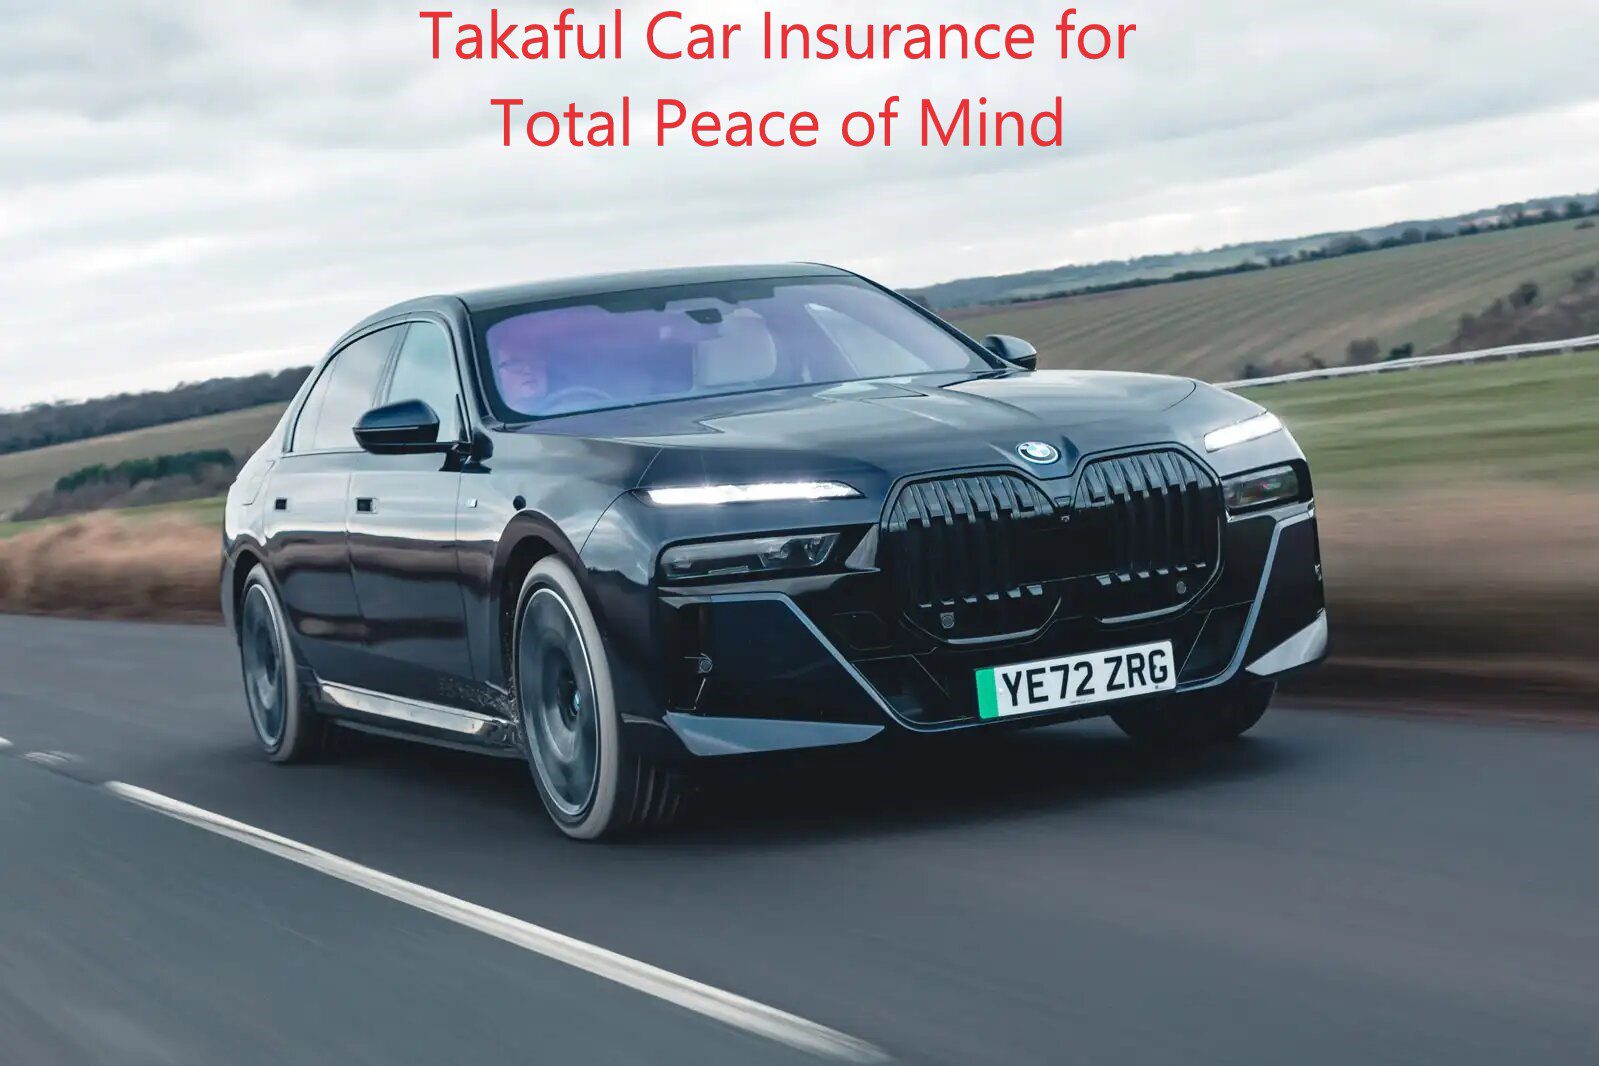 Takaful Car Insurance for Total Peace of Mind